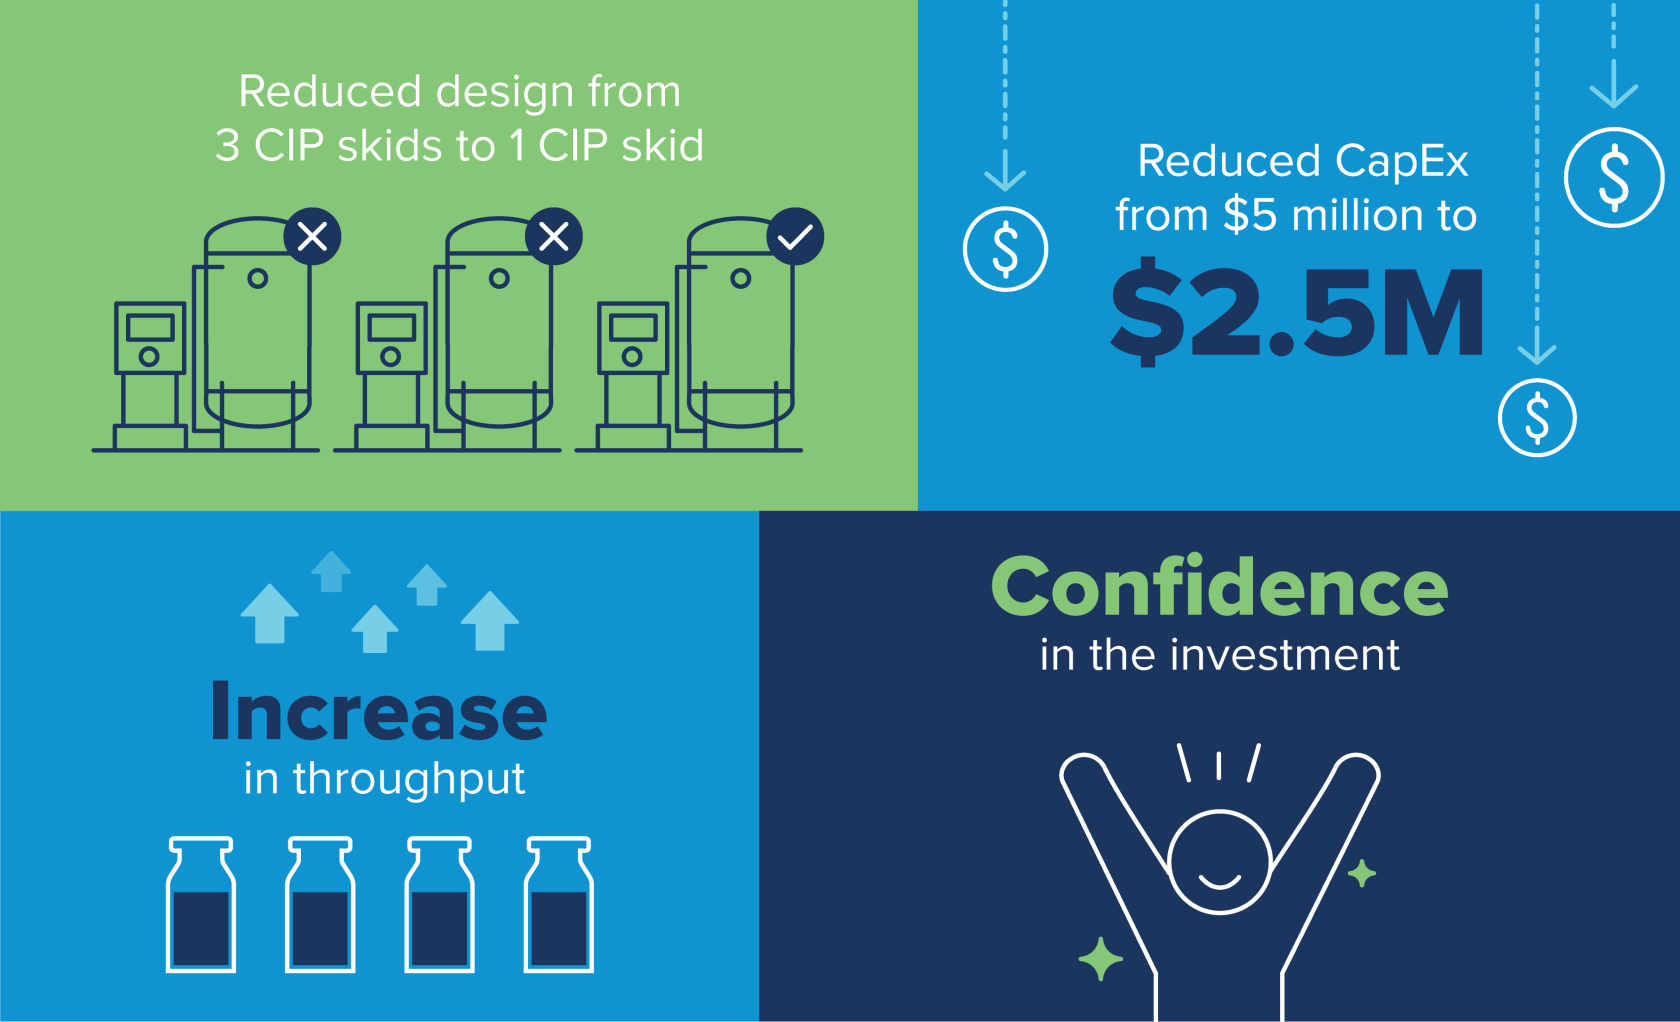 equipment CapEx consulting study results - infographic